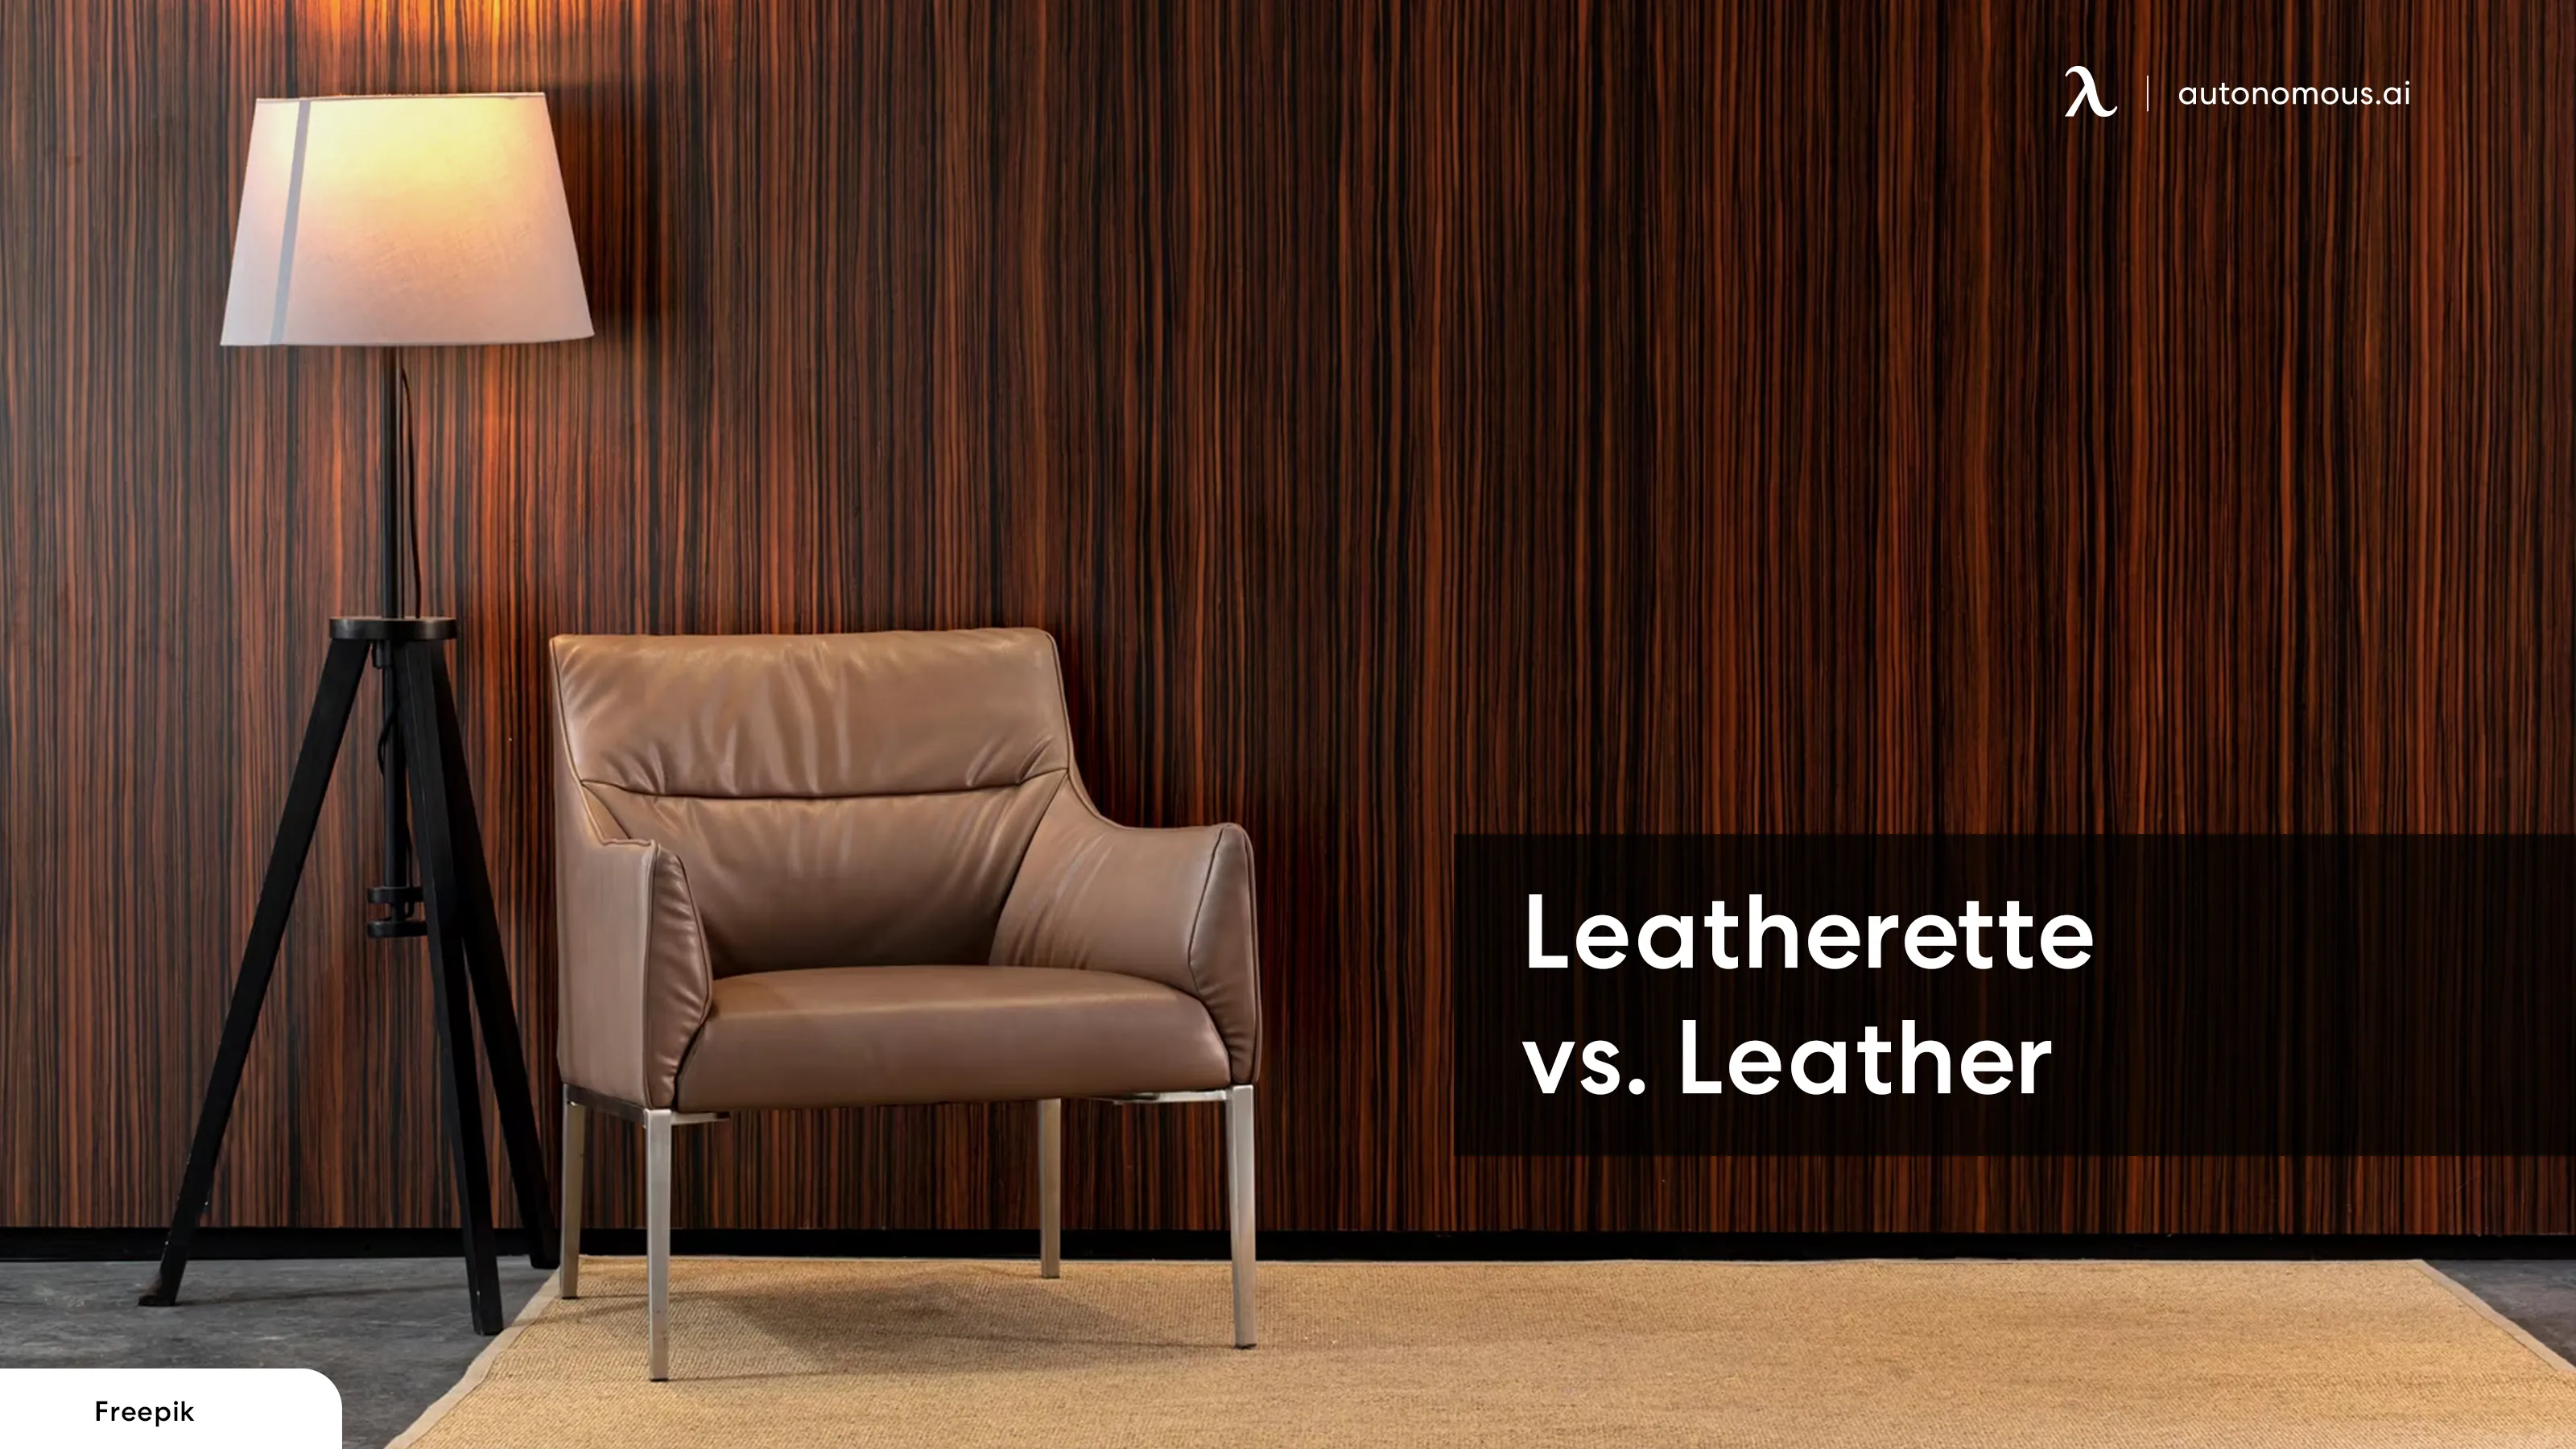 The Differences Between Leatherette and Leather